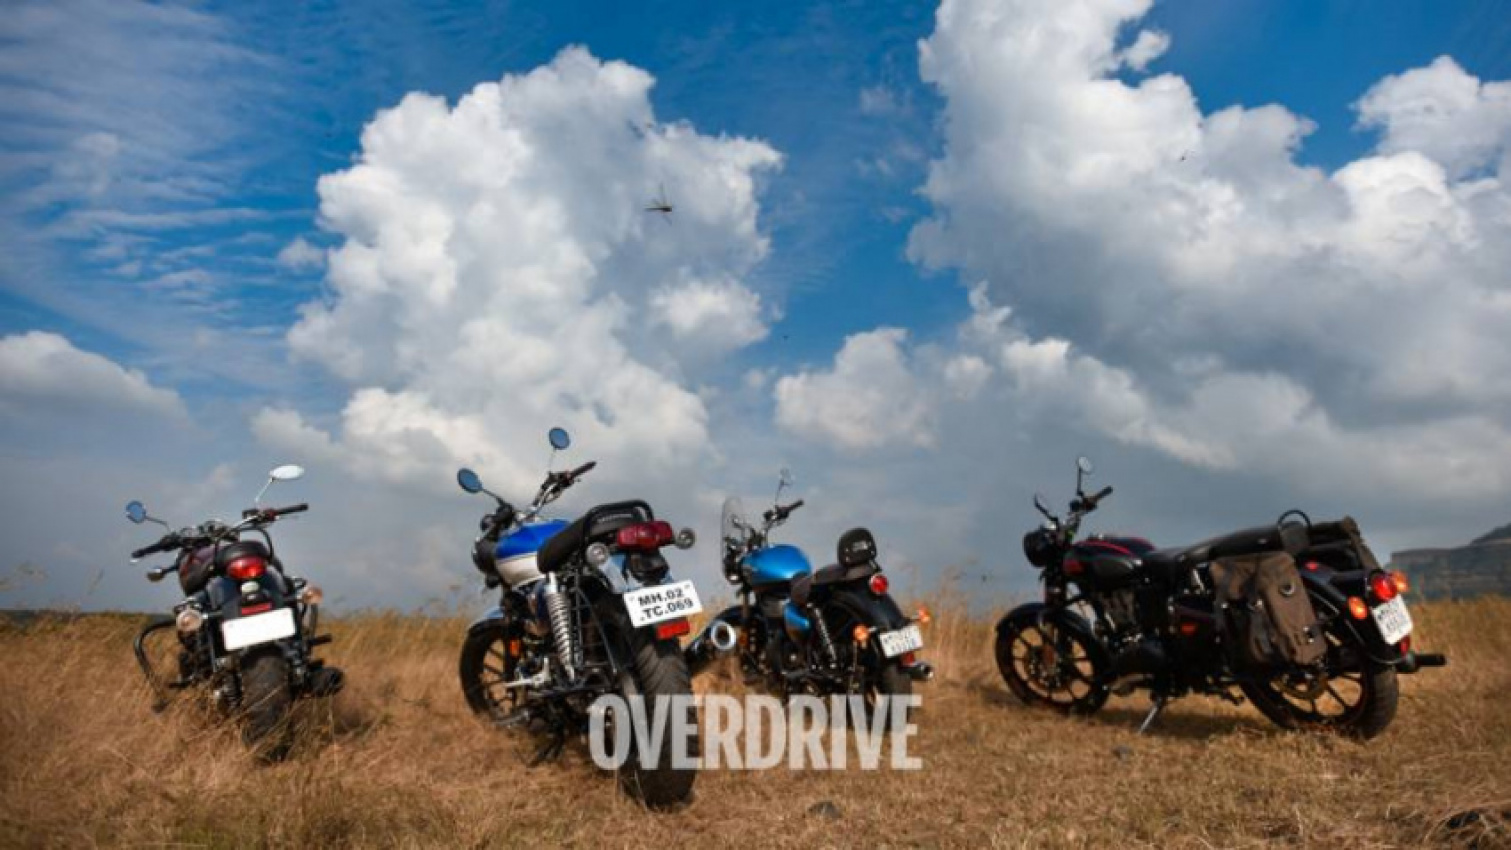 autos, benelli, cars, honda, hness cb350 vs meteor 350, honda cb350, honda h'ness cb350, honda highness 350, honda highness cb350, honda highness cb350 vs royal enfield classic 350, honda highness vs royal enfield meteor, india, meteor 350, meteor 350 royal enfield, meteor 350 vs cb350, meteor 350 vs honda highness, overdrive, review, rohit paradkar, royal enfield, royal enfield classic 350, royal enfield meteor 350, royal enfield meteor 350 review, royal enfield meteor 350 vs honda cb350 highness, royal enfield vs honda, honda h'ness cb350 vs royal enfield meteor 350, classic 350 & benelli imperiale 400